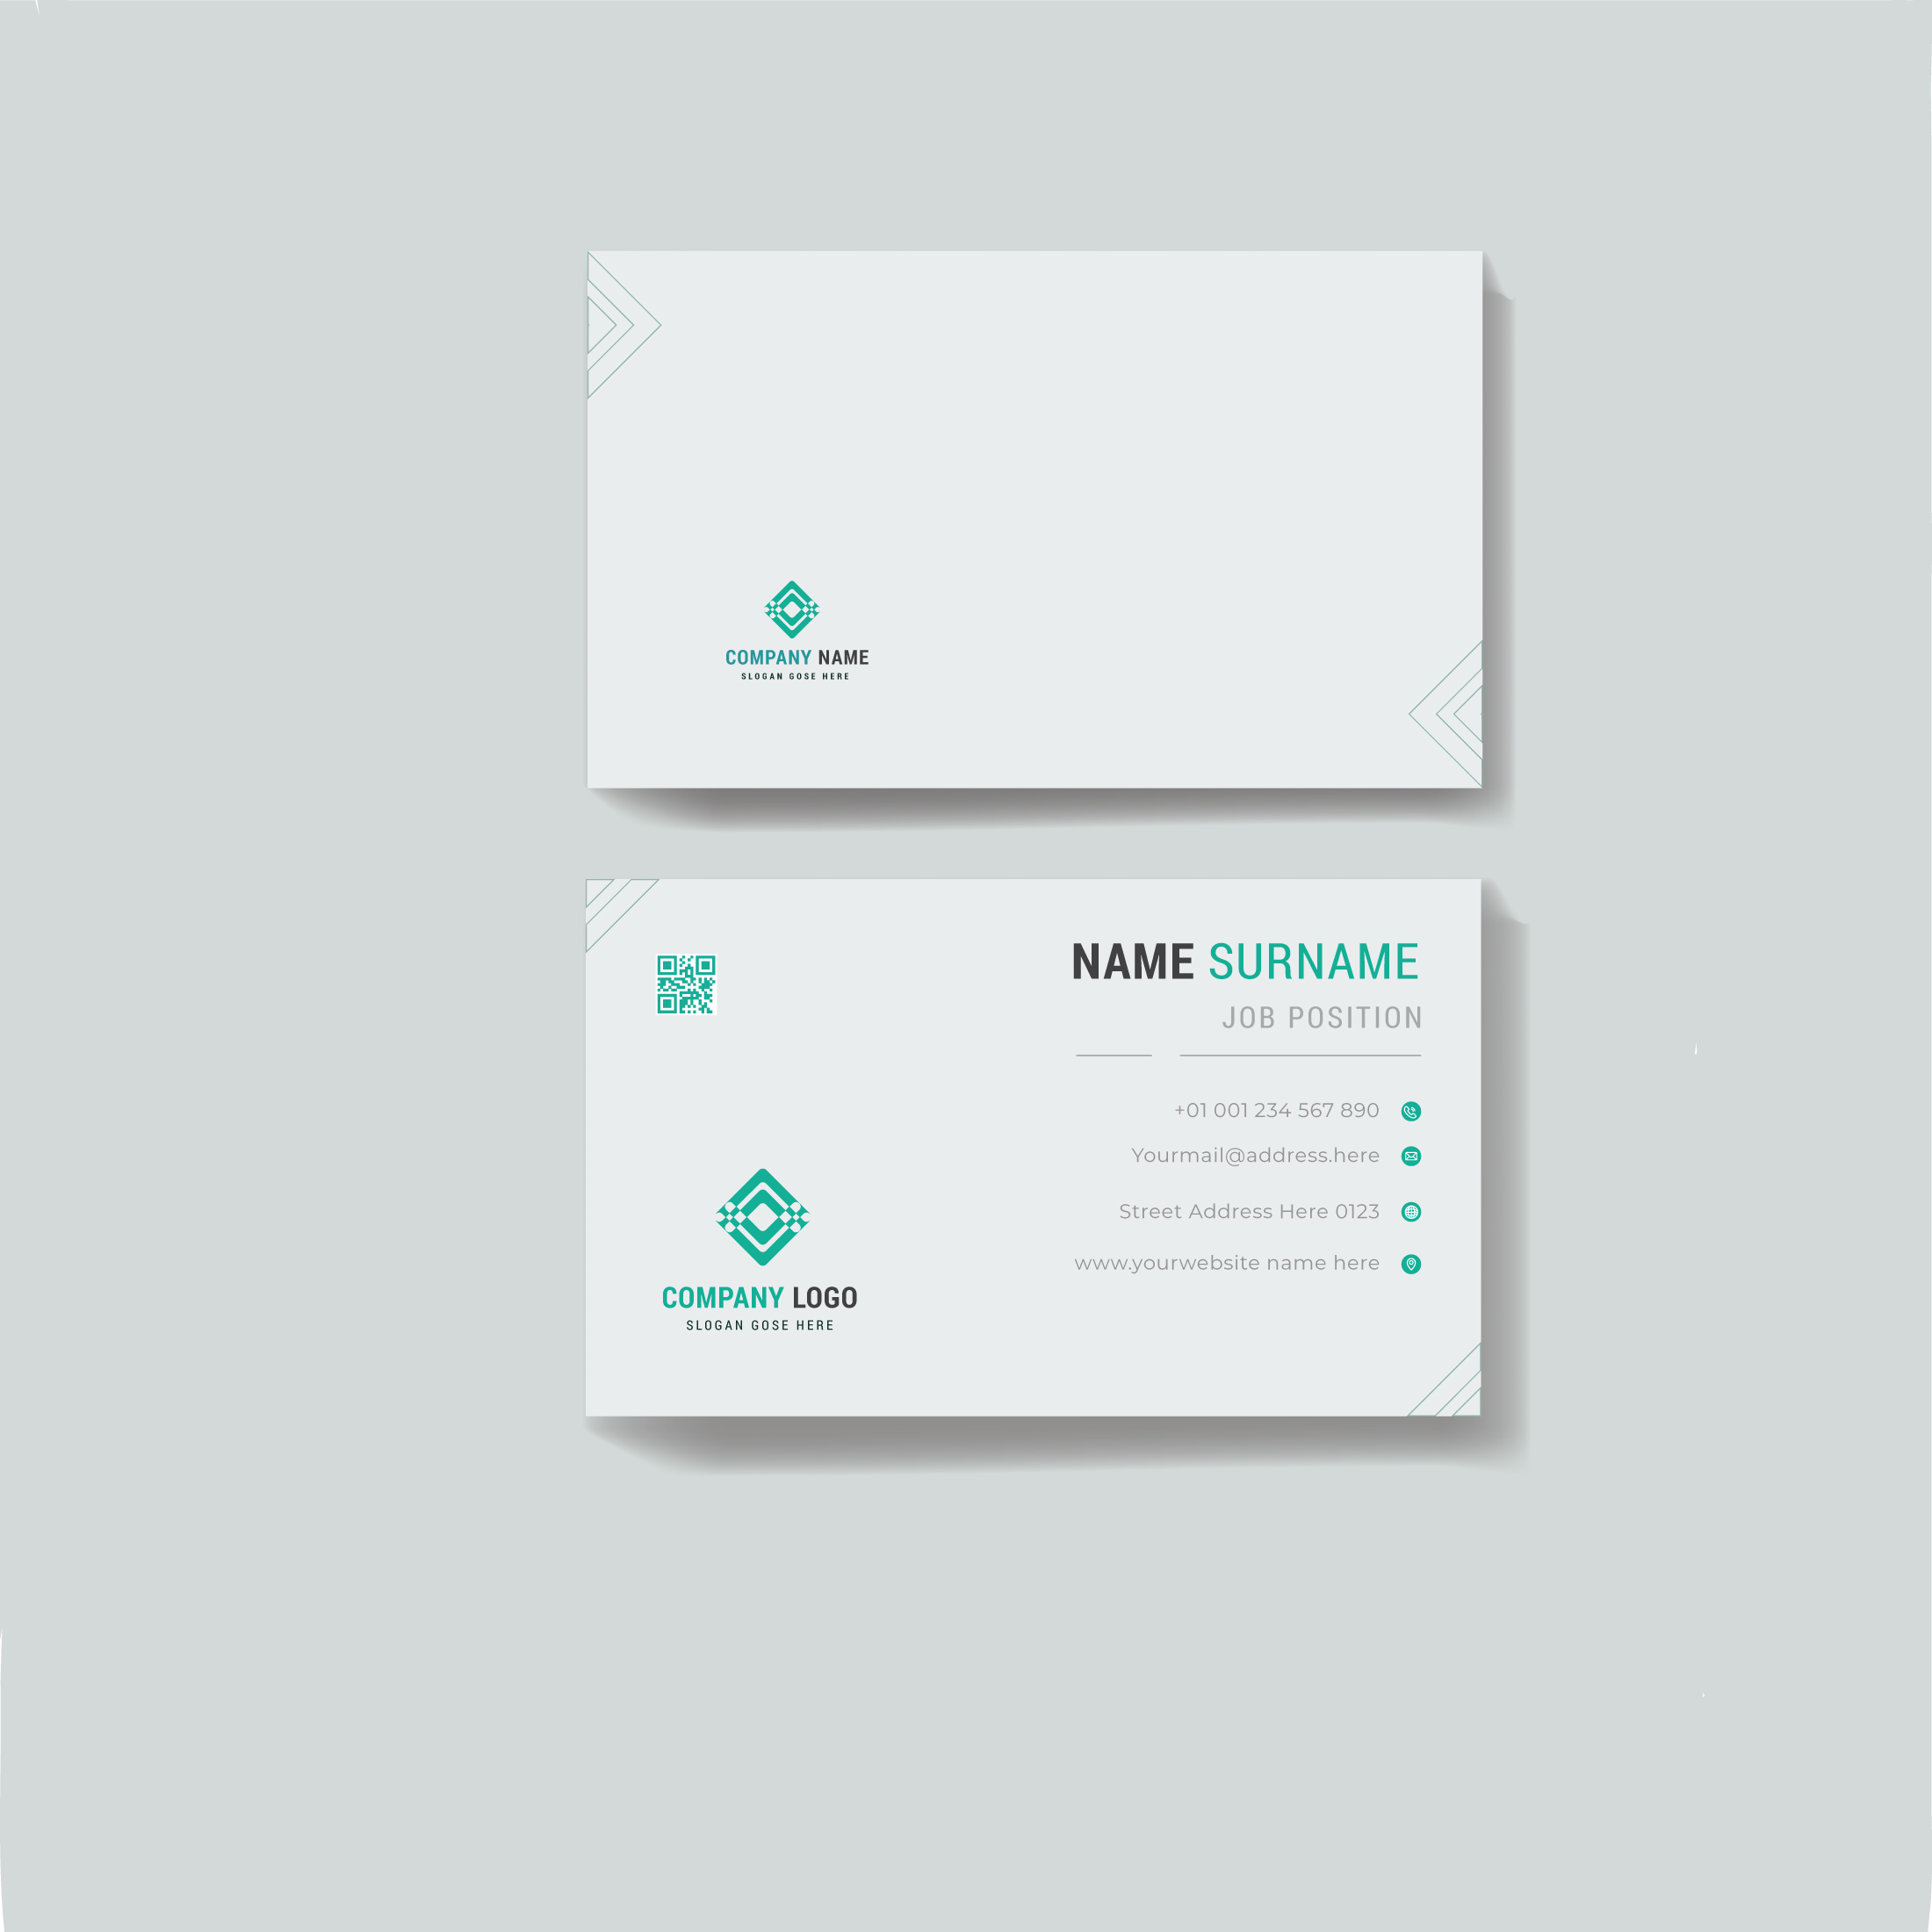 A white business card with a green logo.